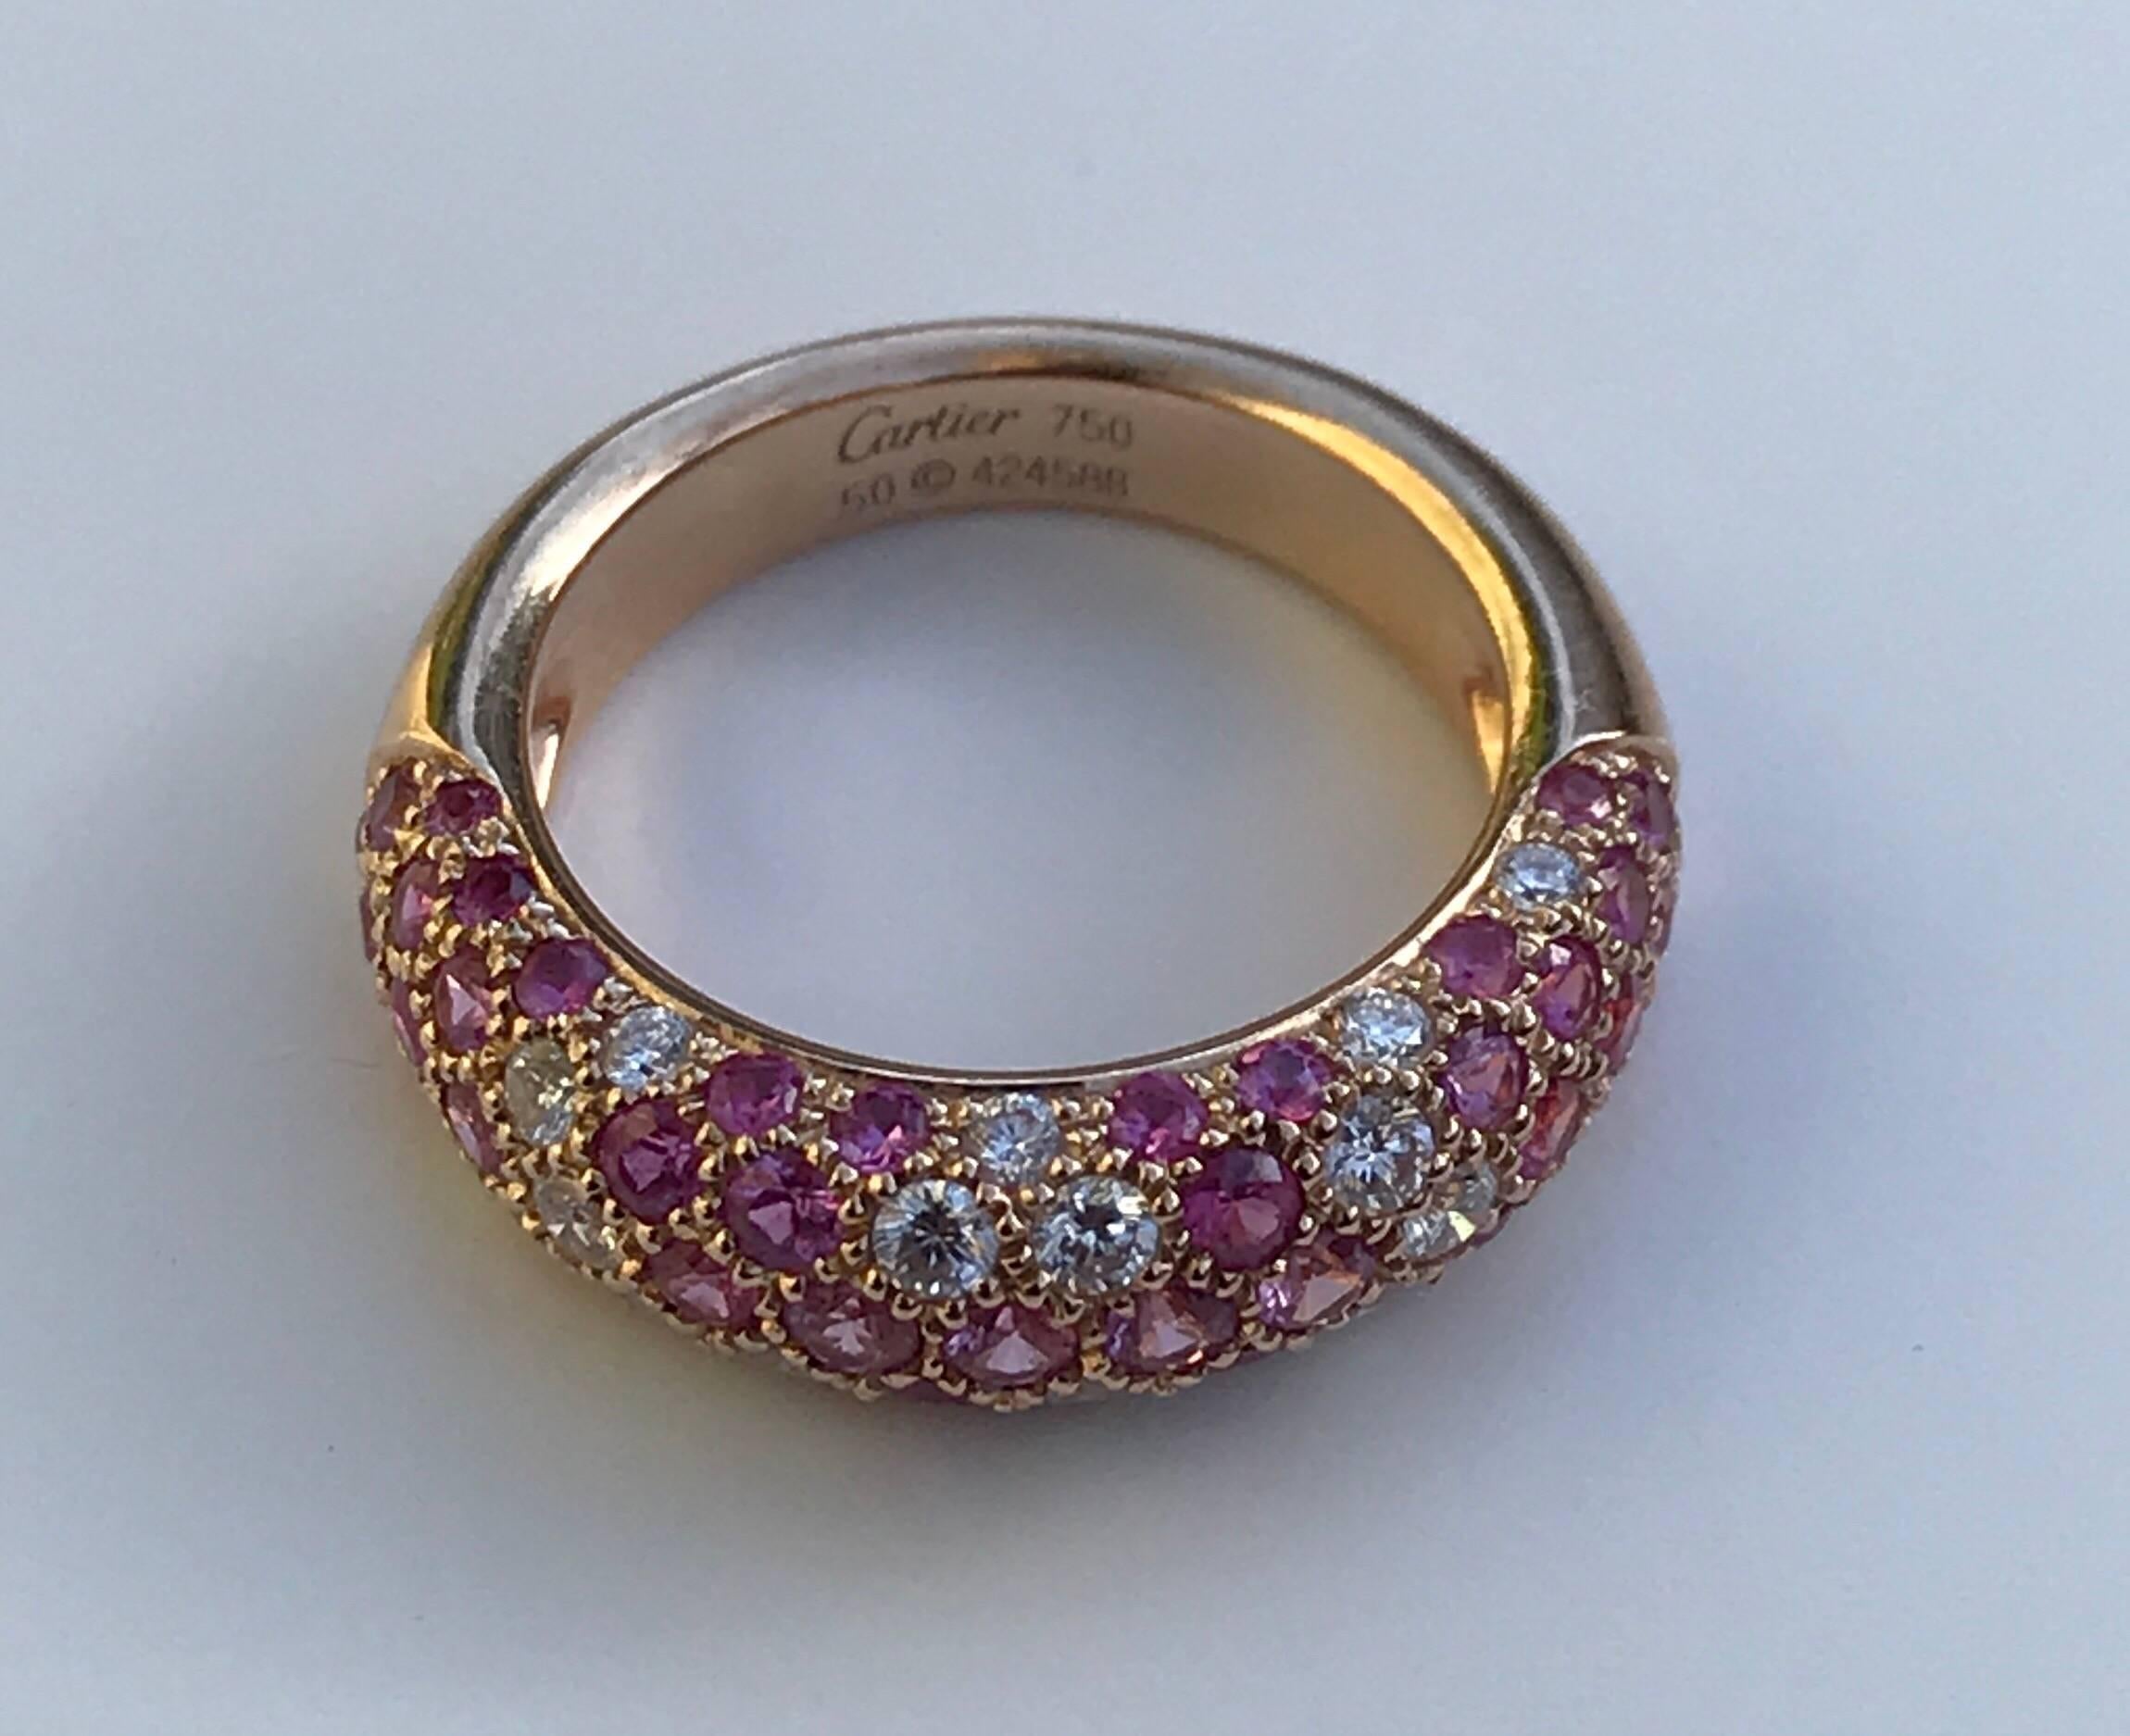 A Cartier Etincelle De Cartier diamond and pink sapphire ring set in18k rose gold. The ring feature brilliant cut natural pink sapphires and diamonds in a pave setting to a plain rose gold band.
The ring is sold with box but does not have